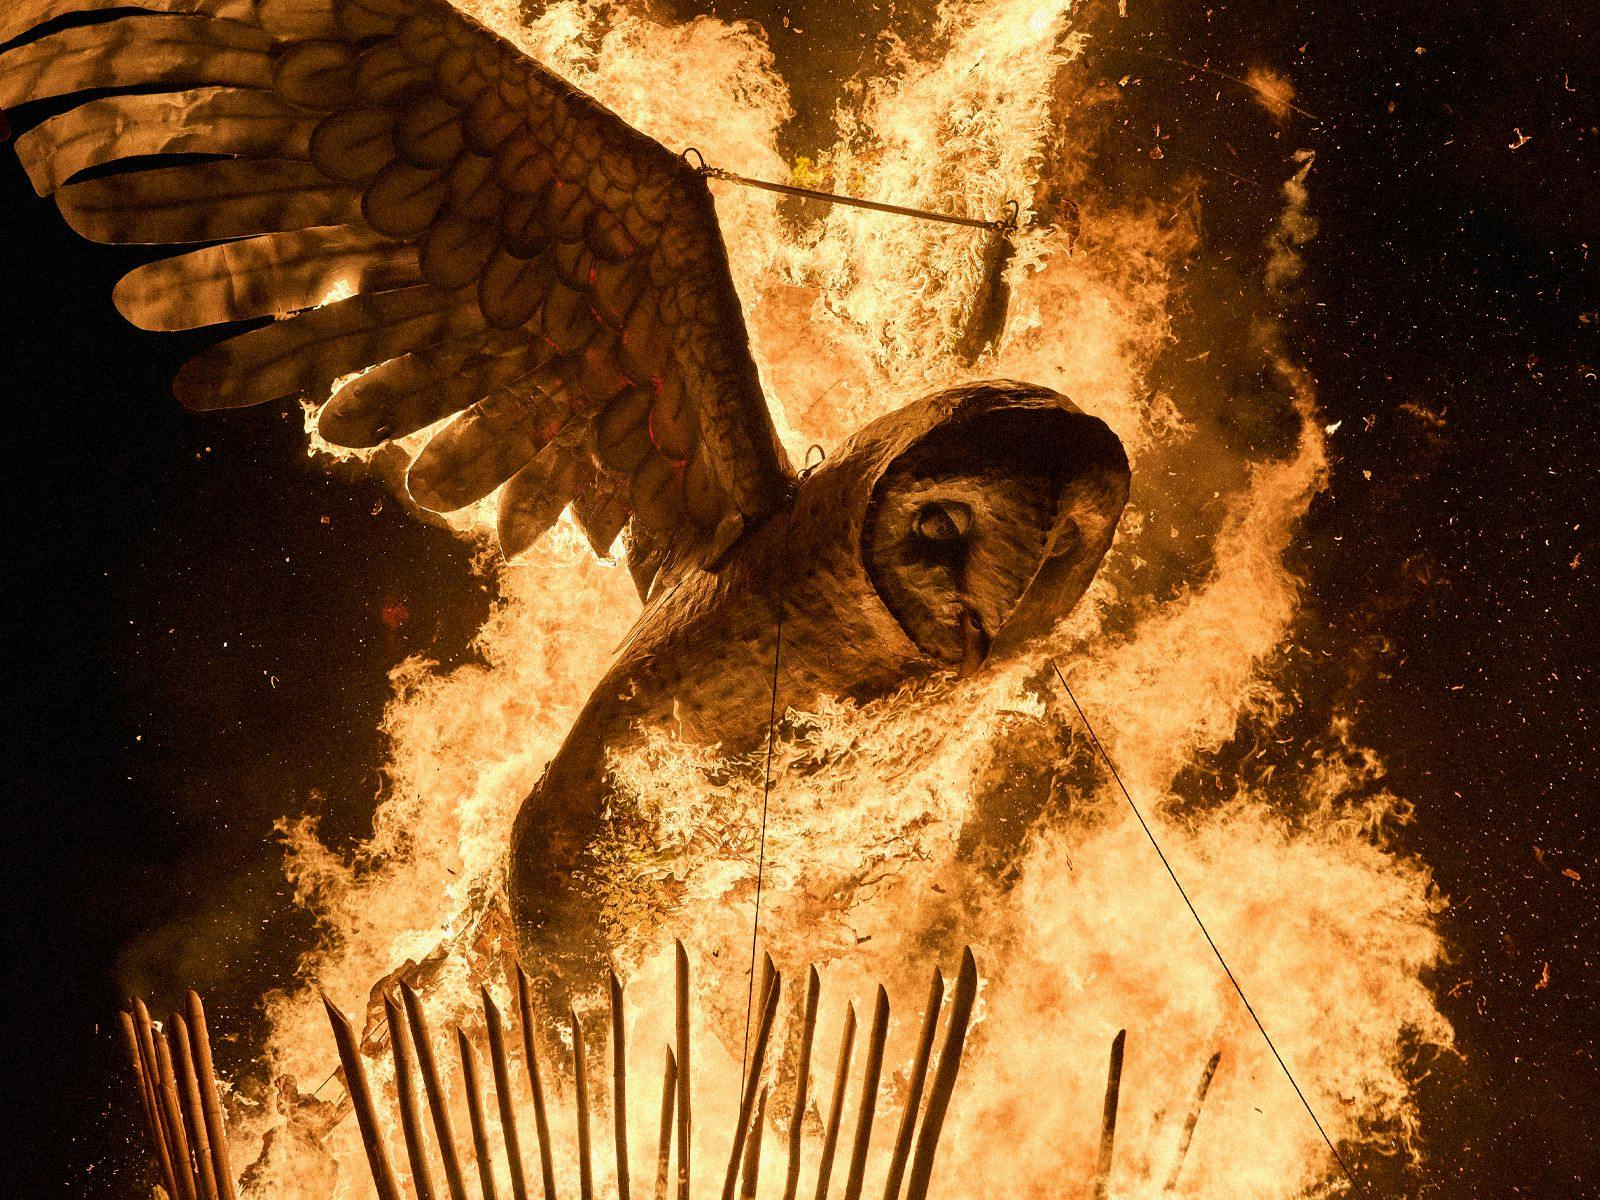 A giant wooden owl burns furiously in the dark of night.